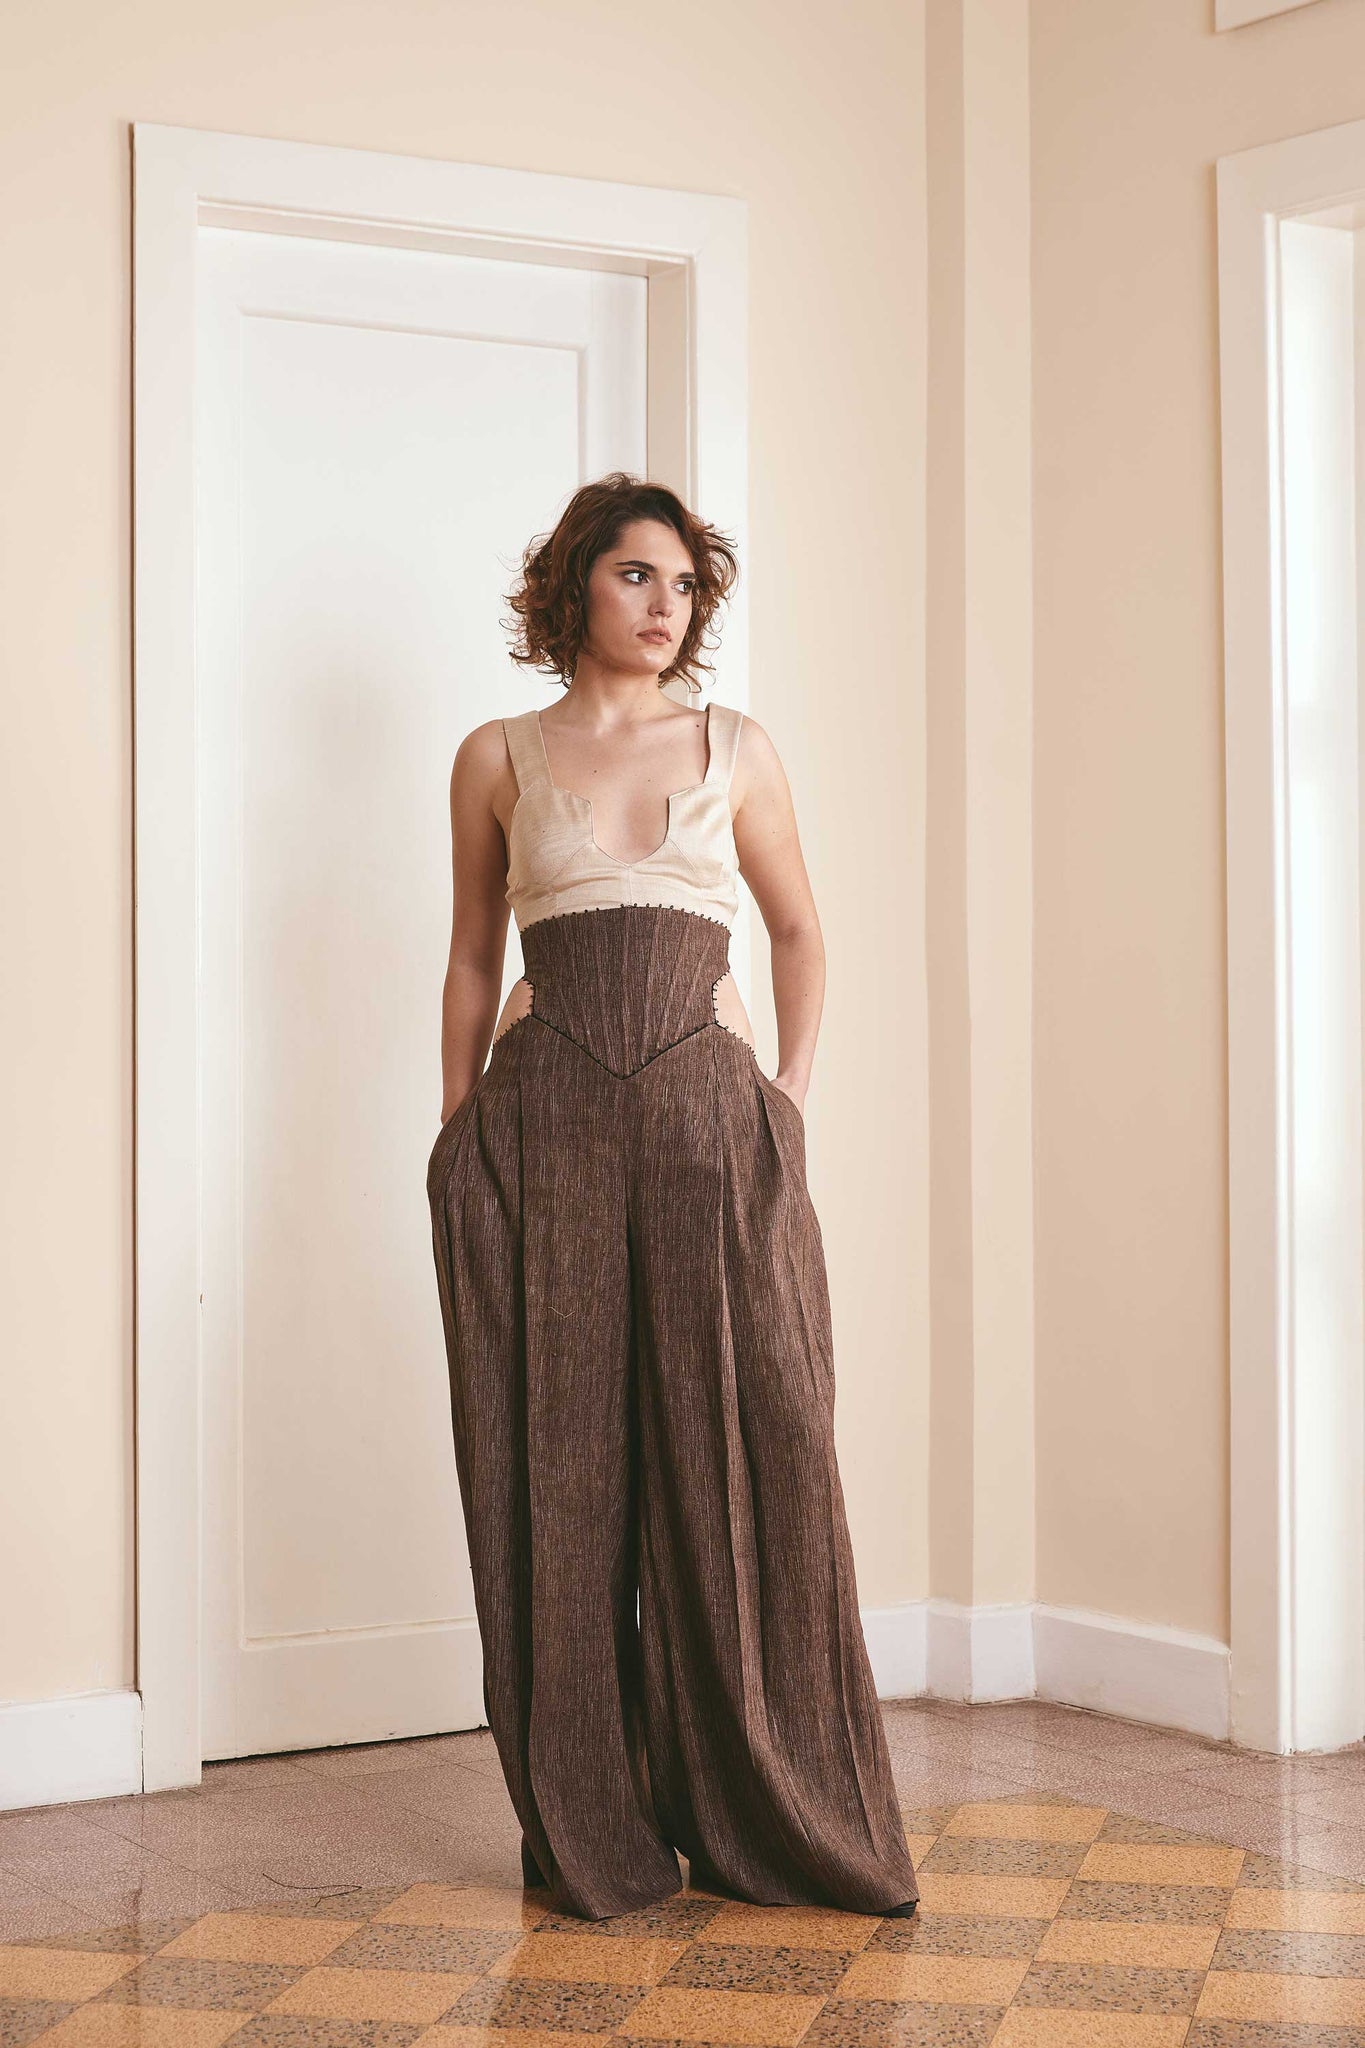 Sustainable fashion choice: Distorted brown wool pants with corset waist and side pockets - Ethical clothing option for conscious consumers